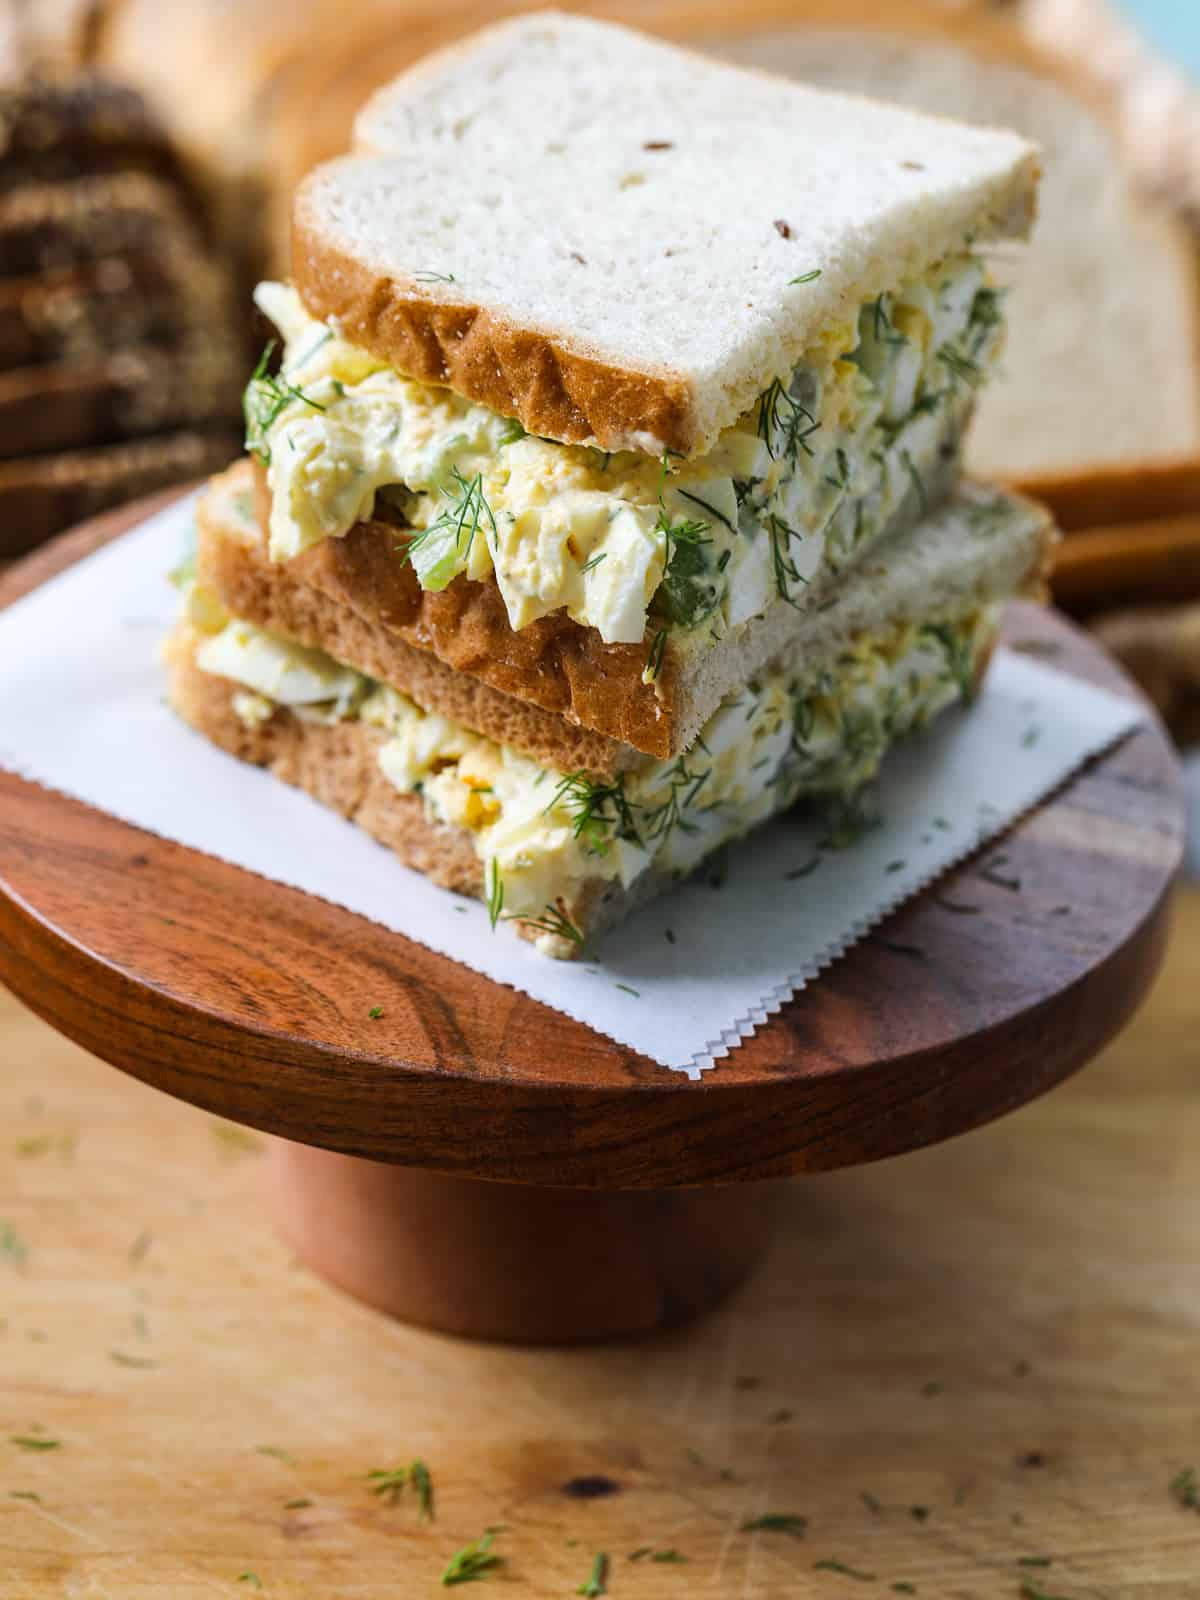 Egg salad on white sandwich bread cut in half on a wood stand.